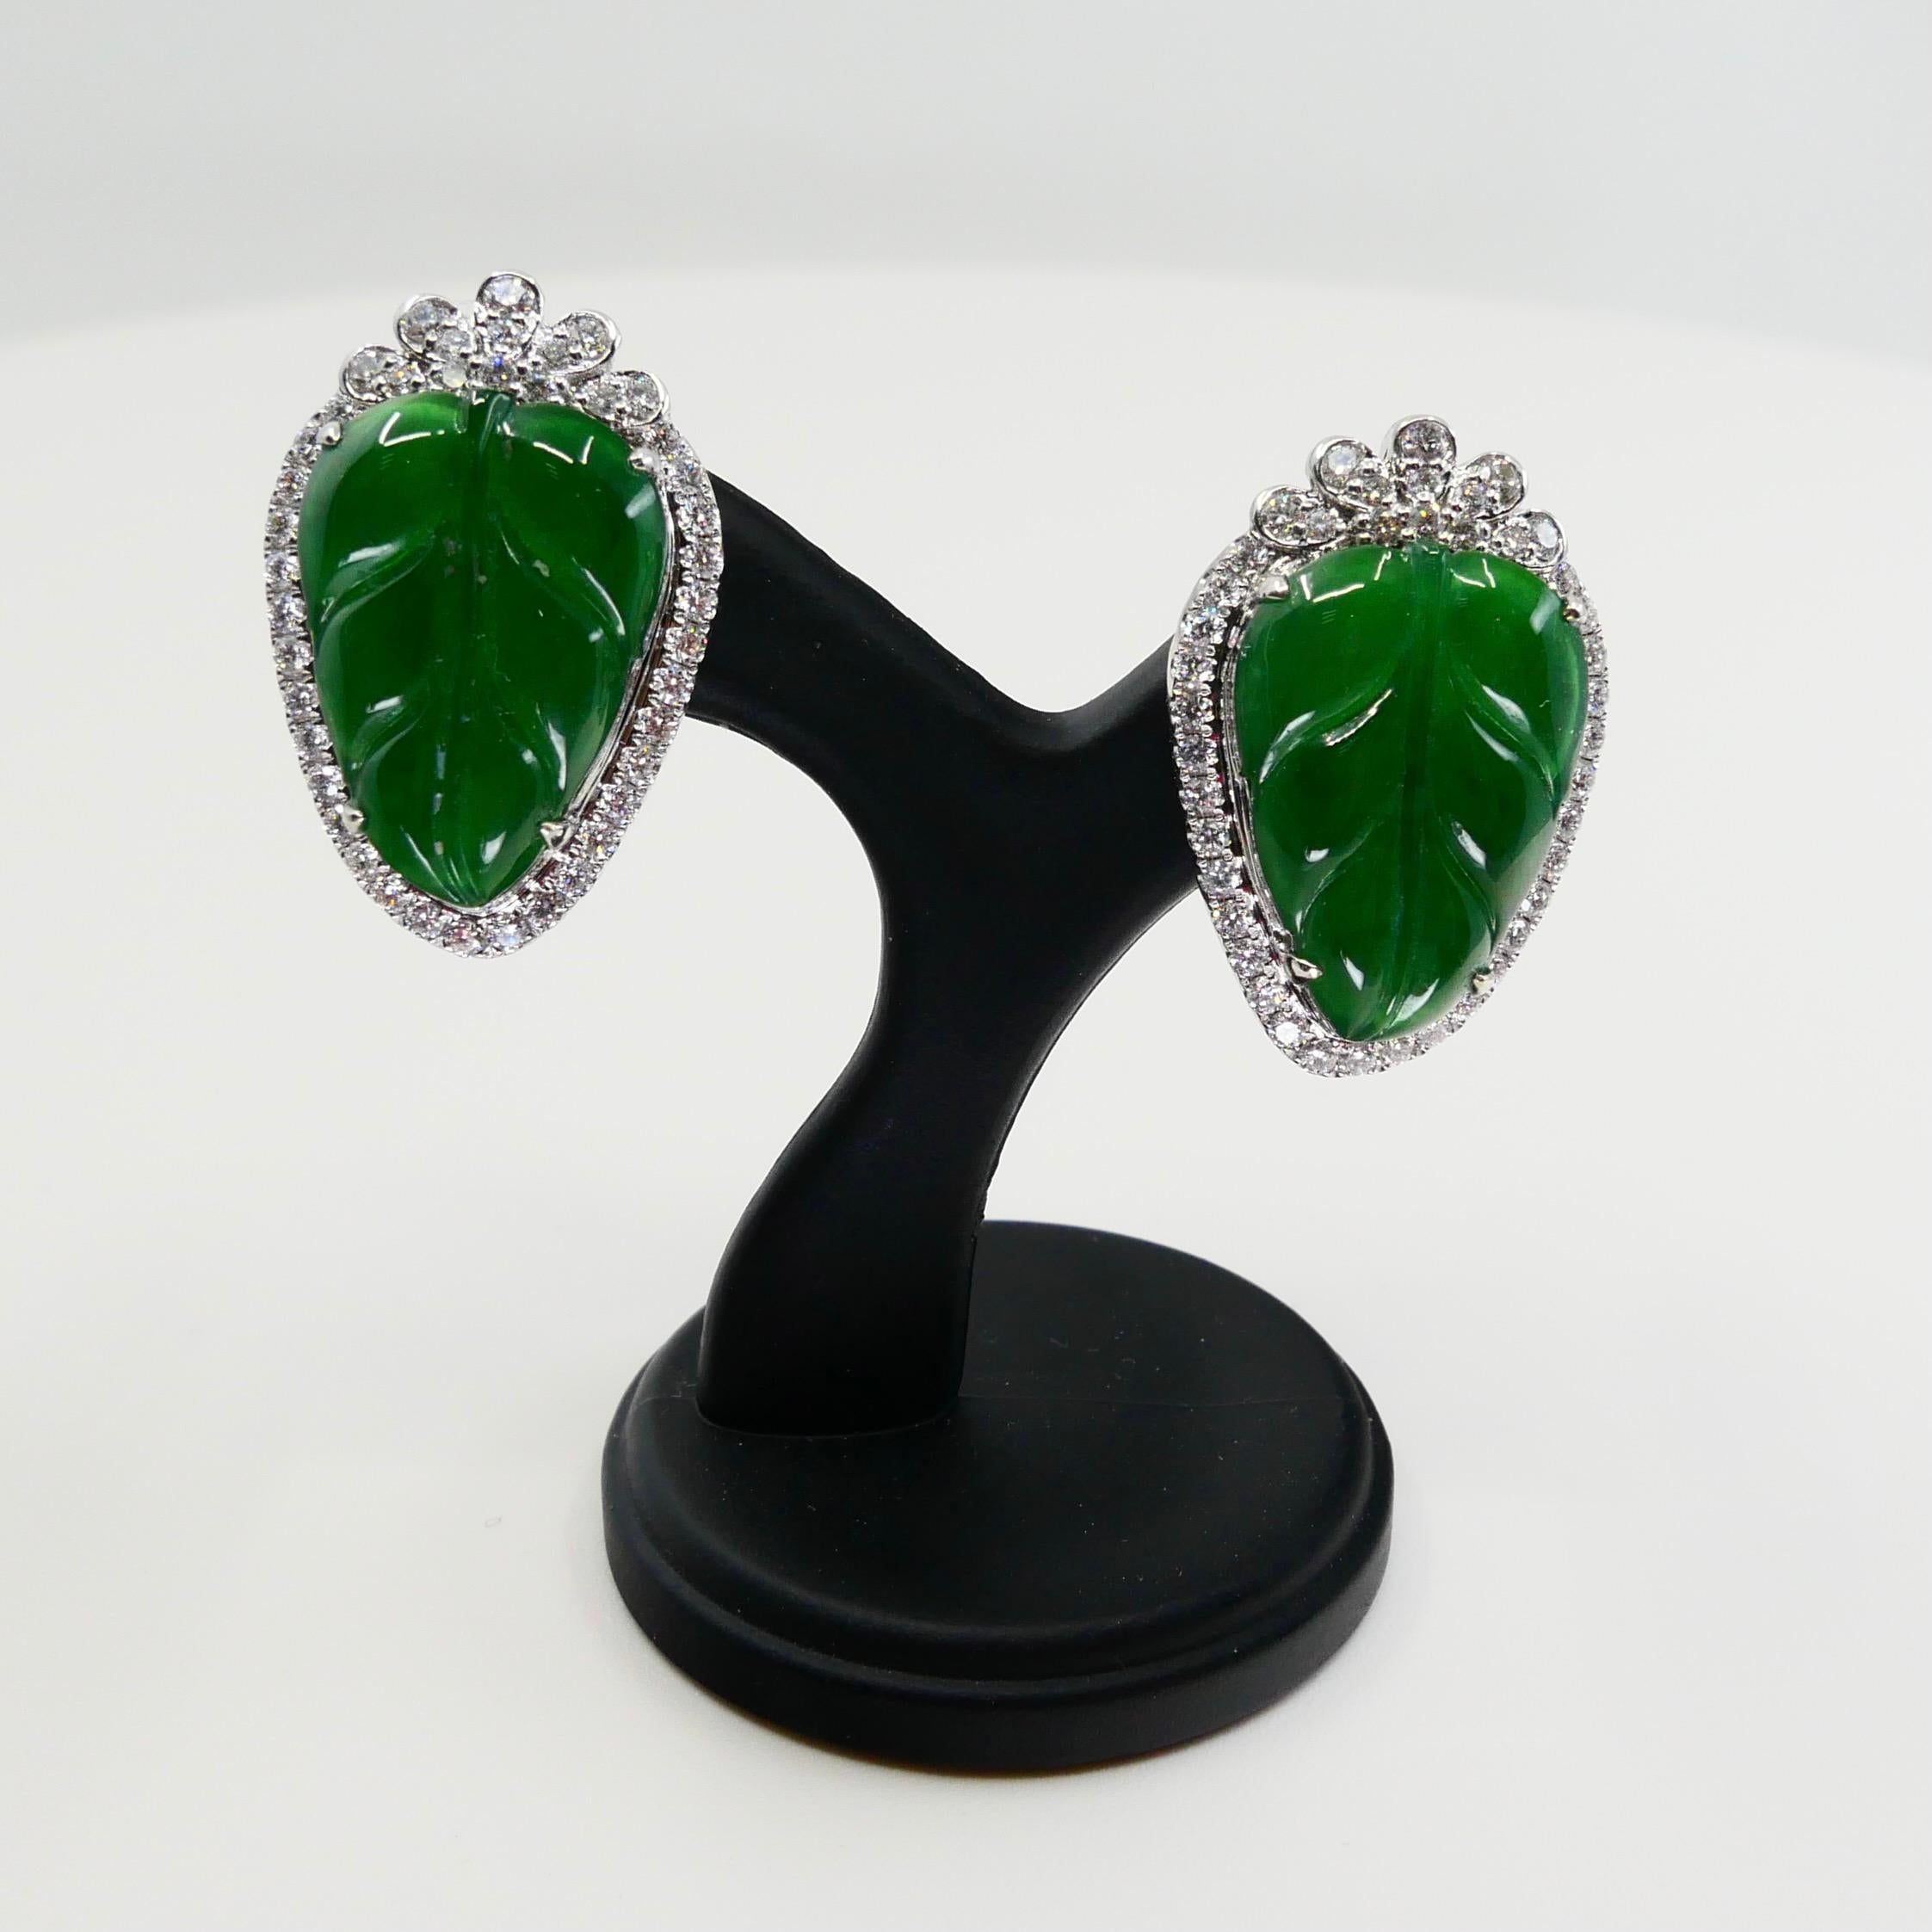 Certified Icy Imperial Green Jade and Diamond Earrings, Collector's Quality For Sale 5